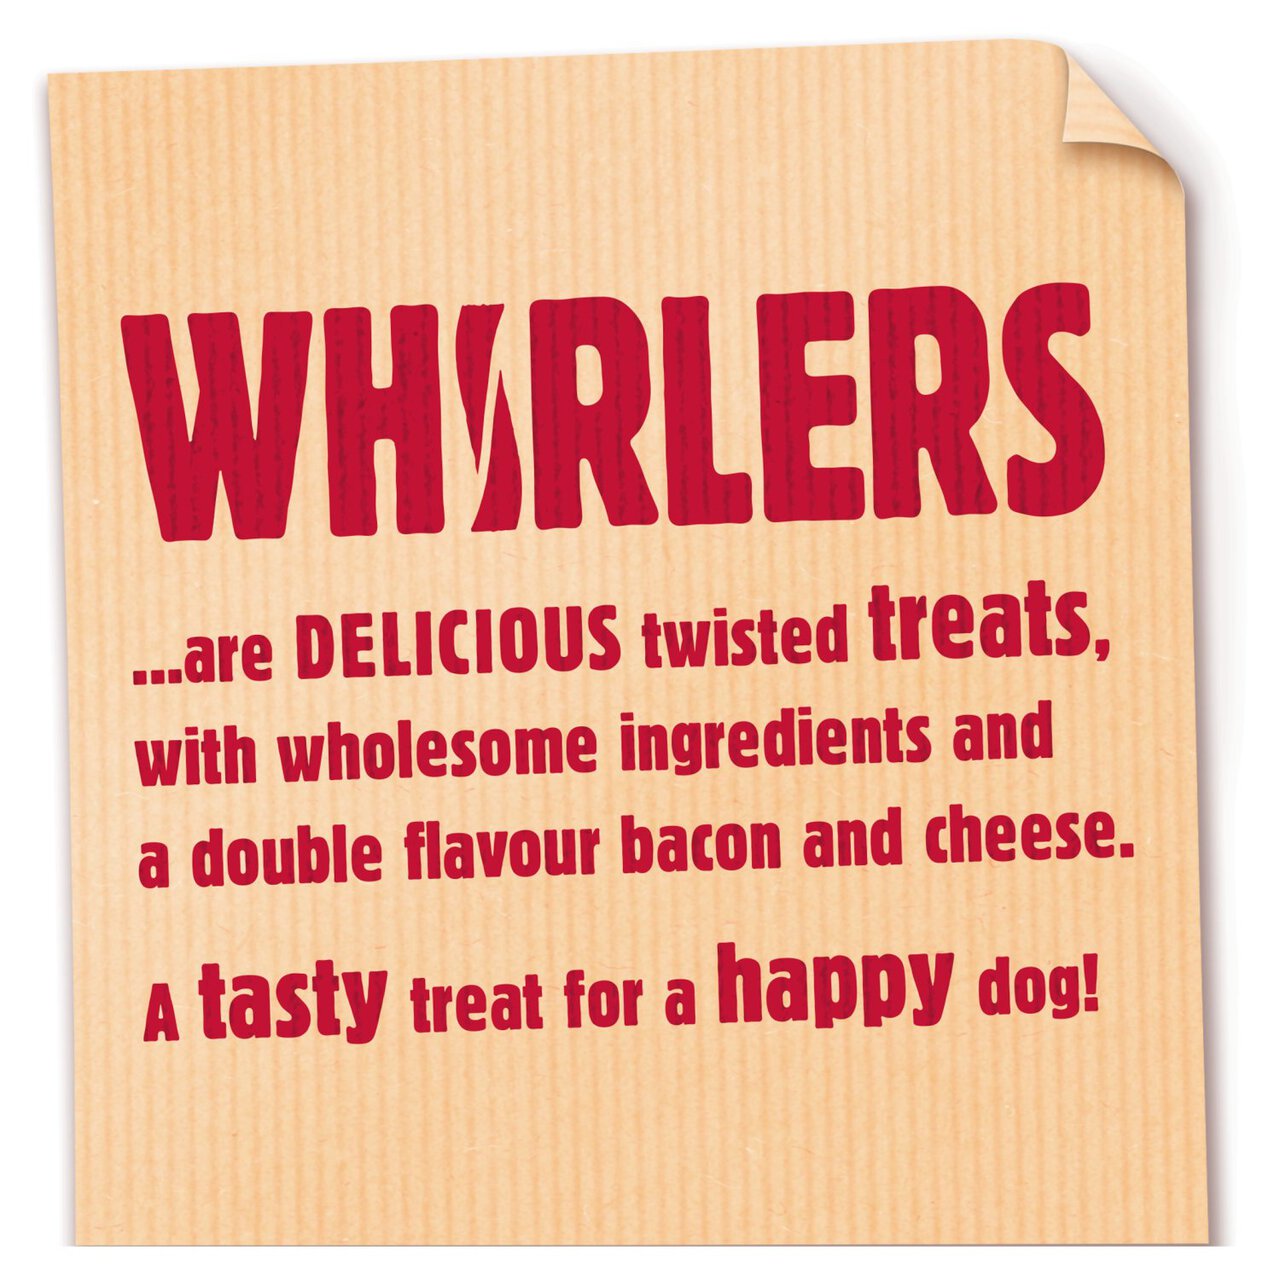 Bakers Whirlers Dog Treat Bacon and Cheese 130g